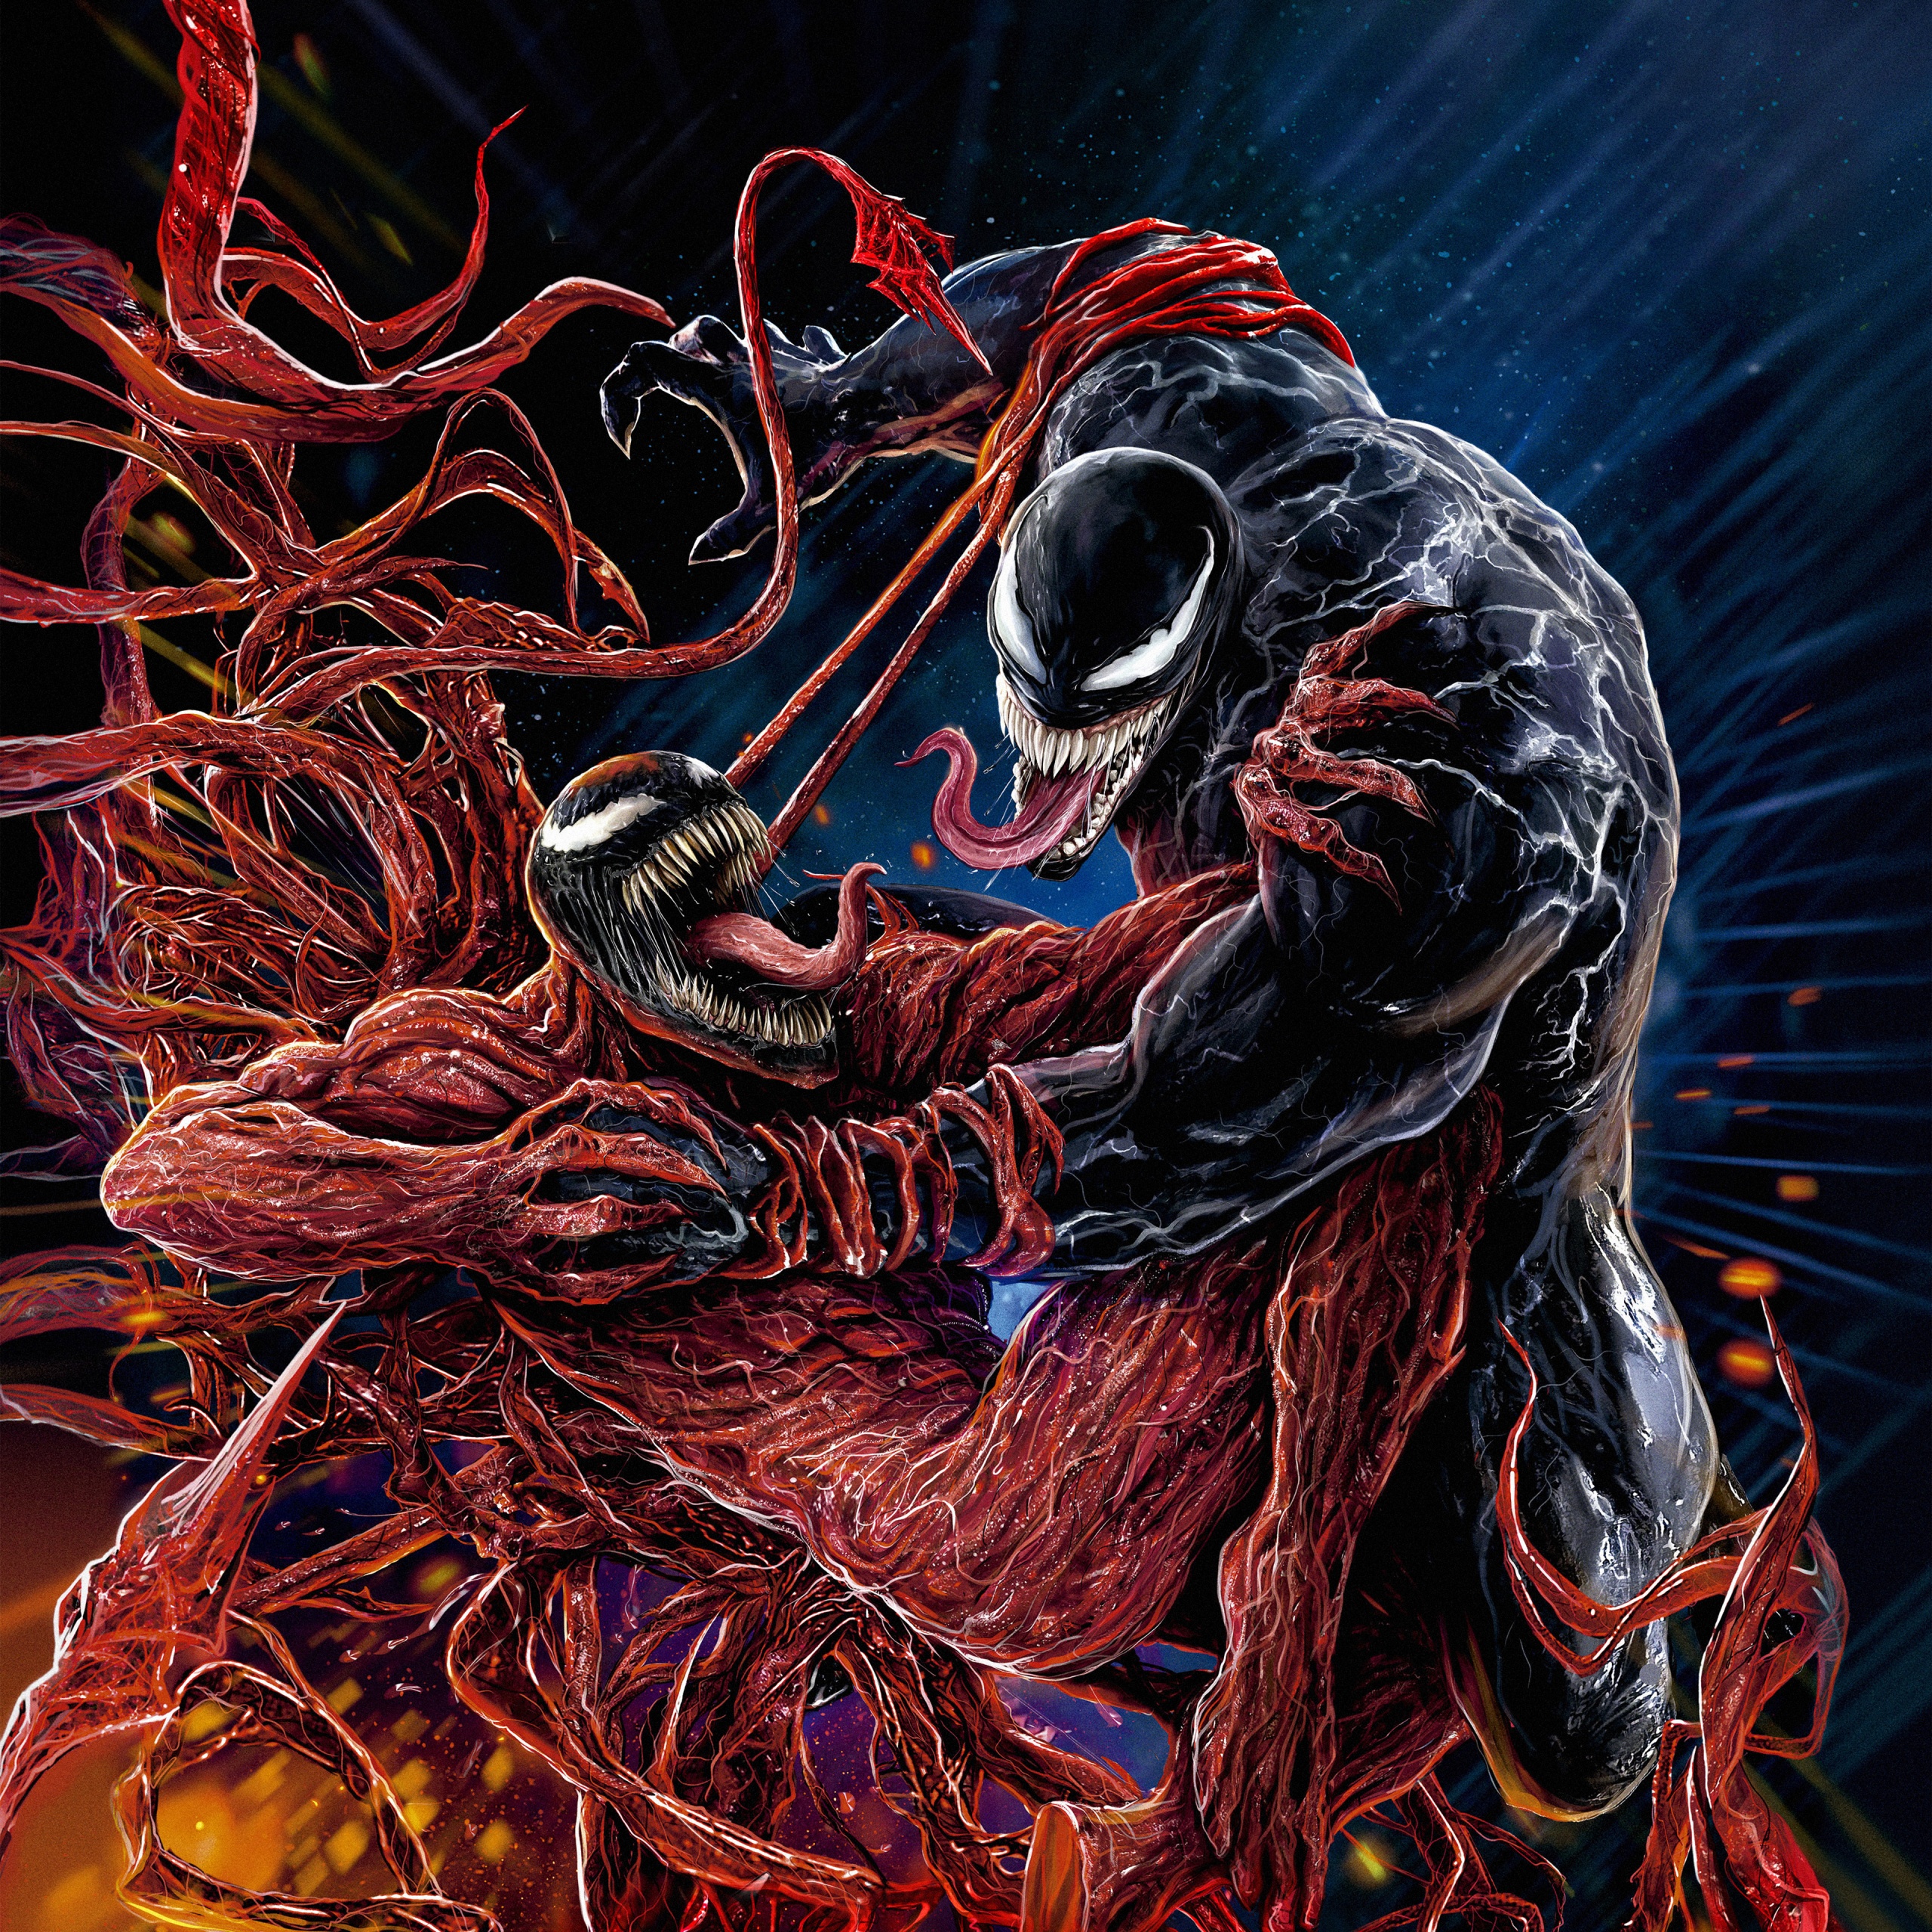 https://4kwallpapers.com/images/wallpapers/venom-let-there-be-carnage-venom-2-marvel-comics-2021-movies-2560x2560-6706.jpg